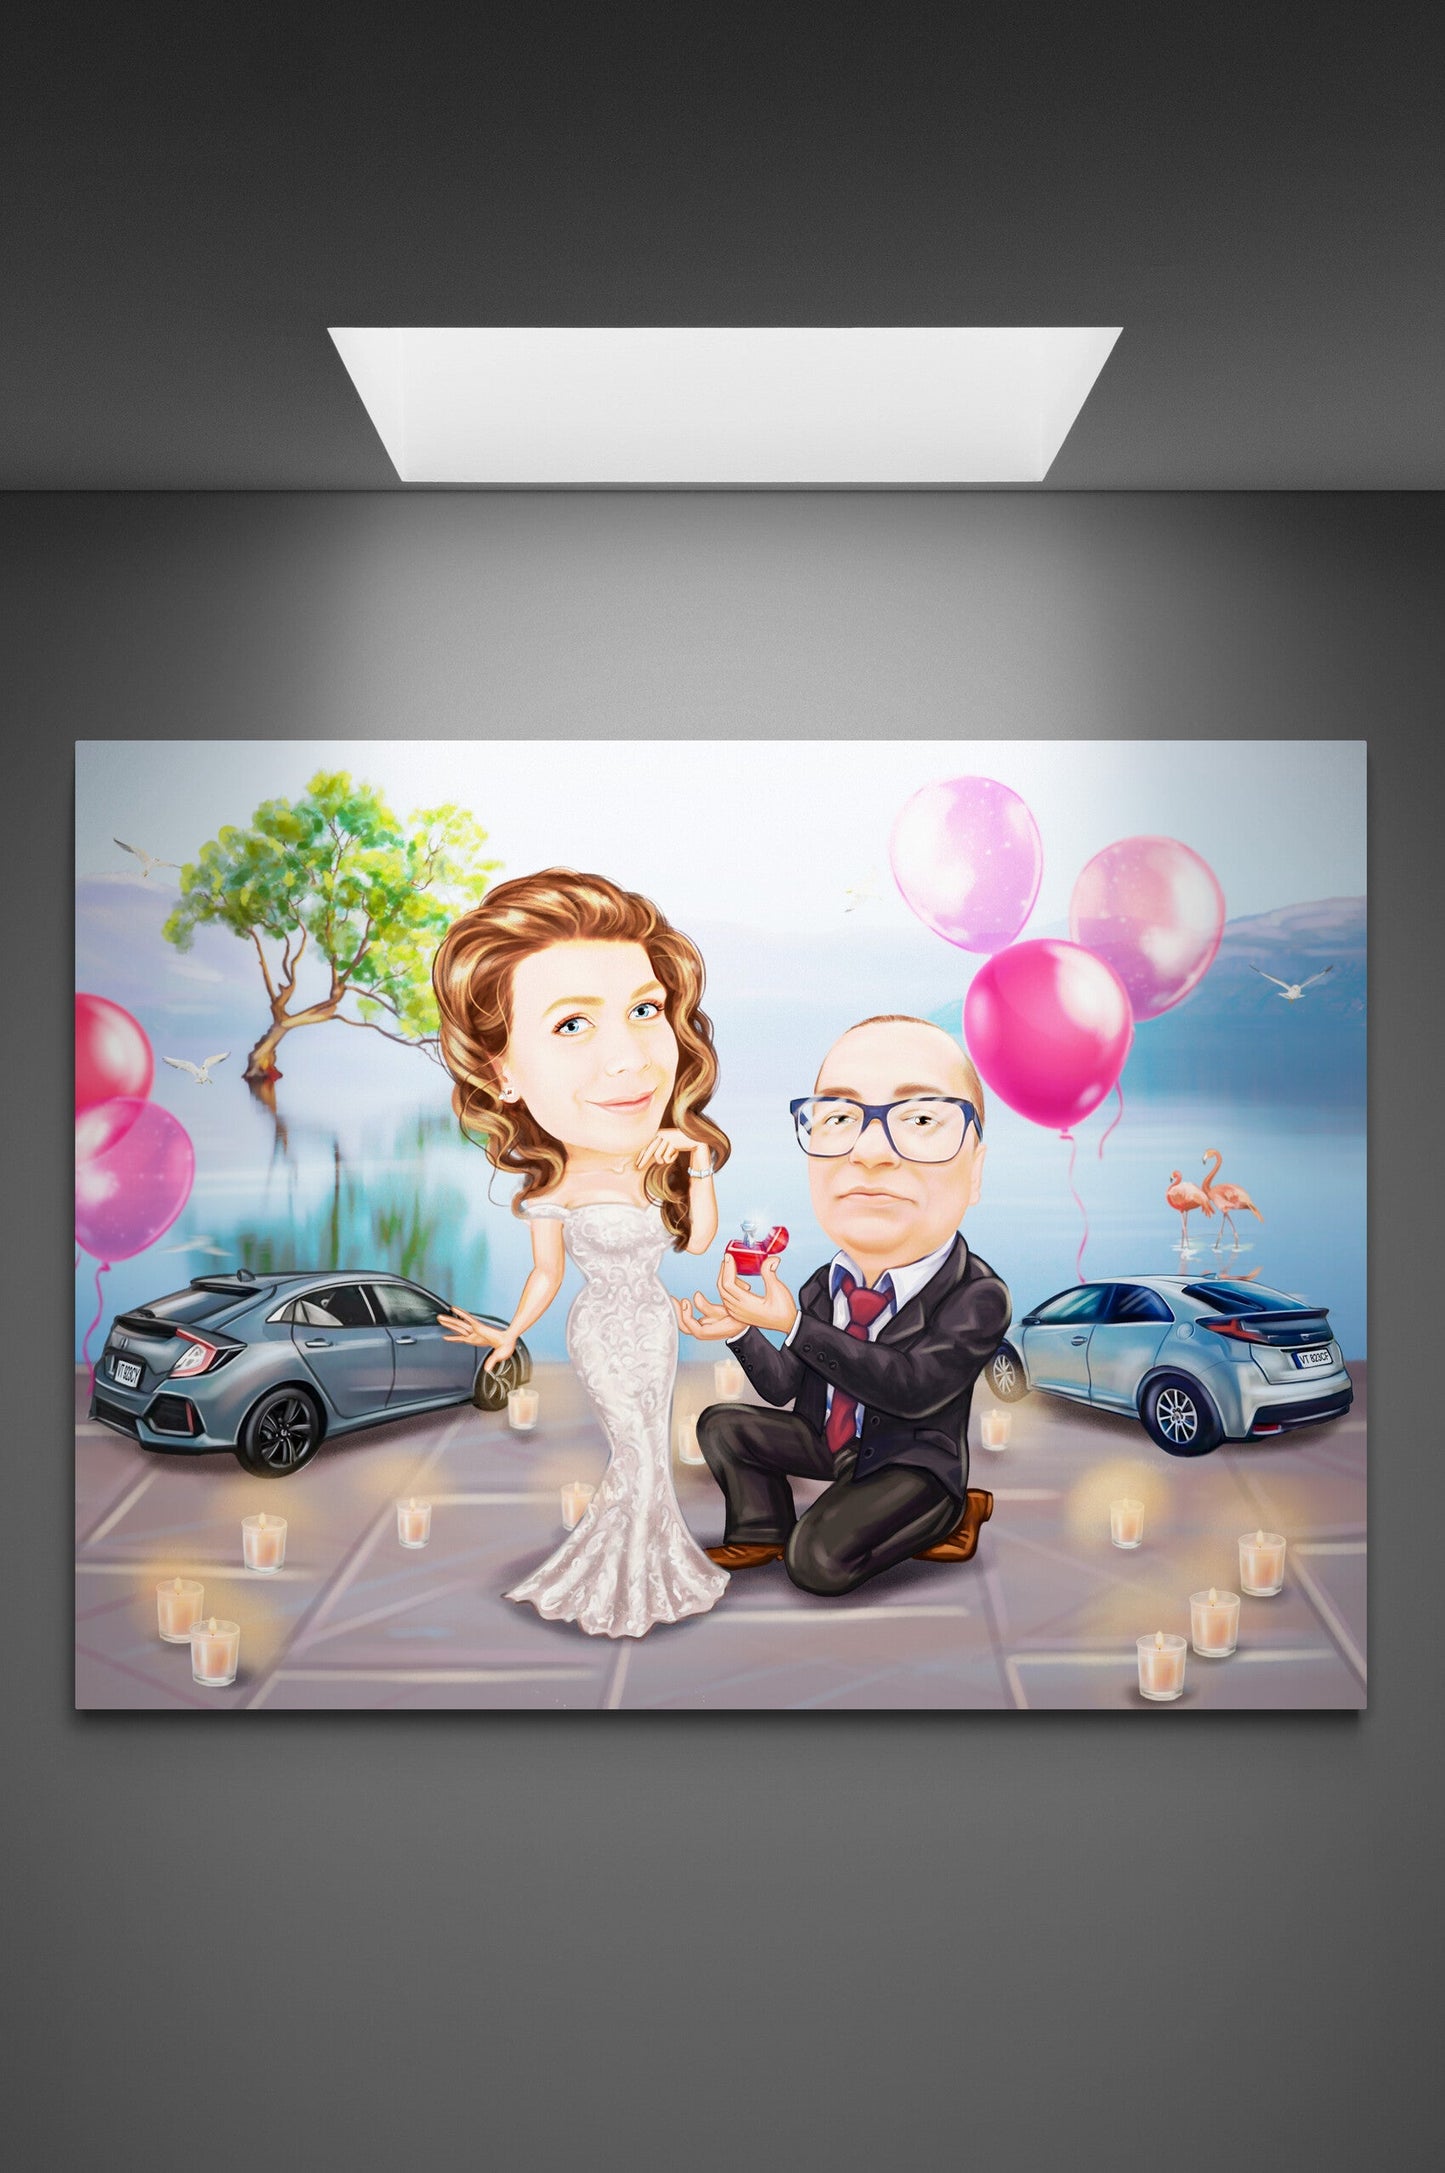 Ring and gift marriage proposal caricature